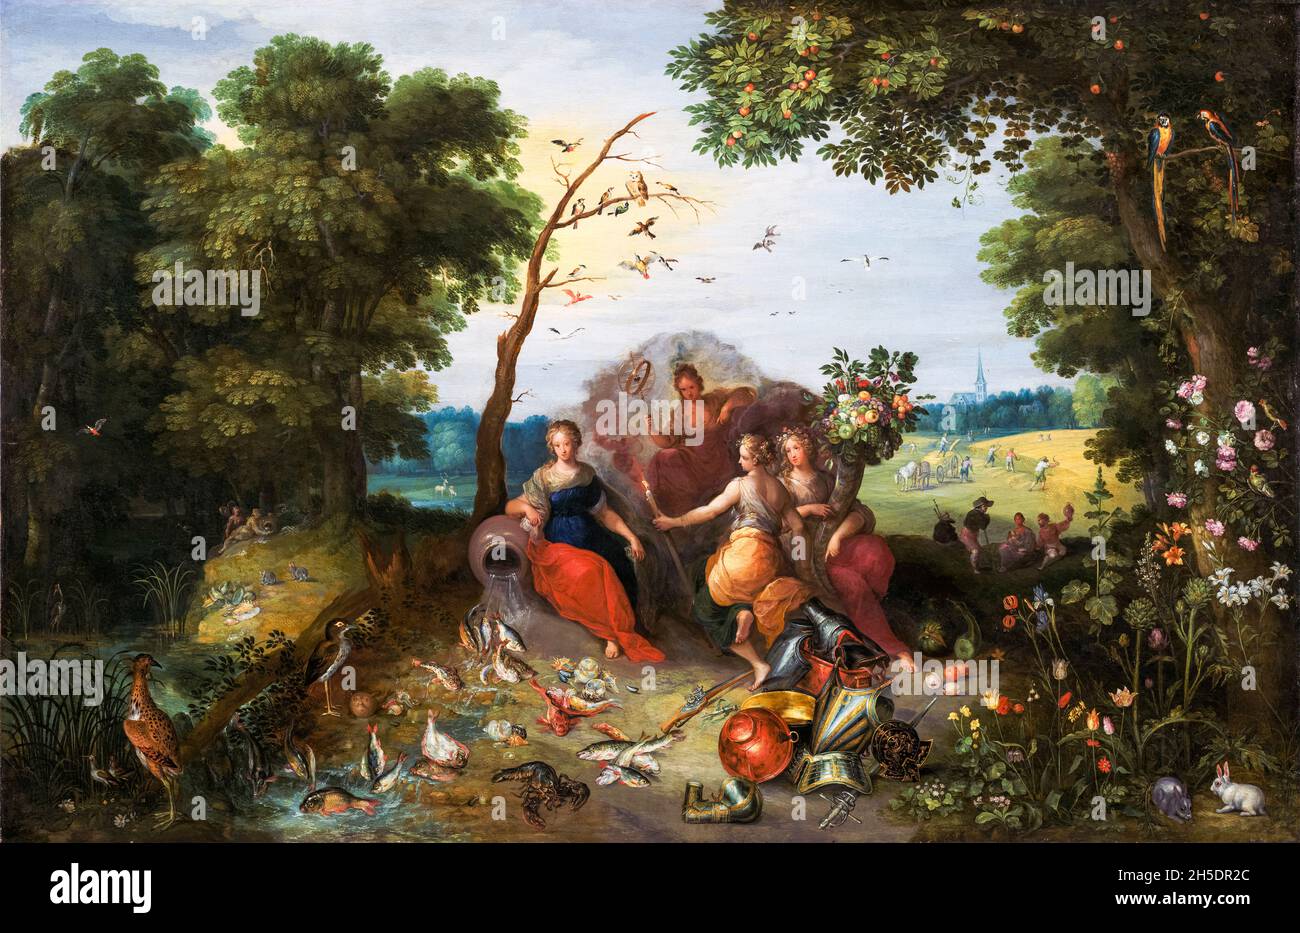 Jan Brueghel the Younger & Frans Francken the Younger, Landscape with Allegories of the Four Elements, painting, 1635 Stock Photo